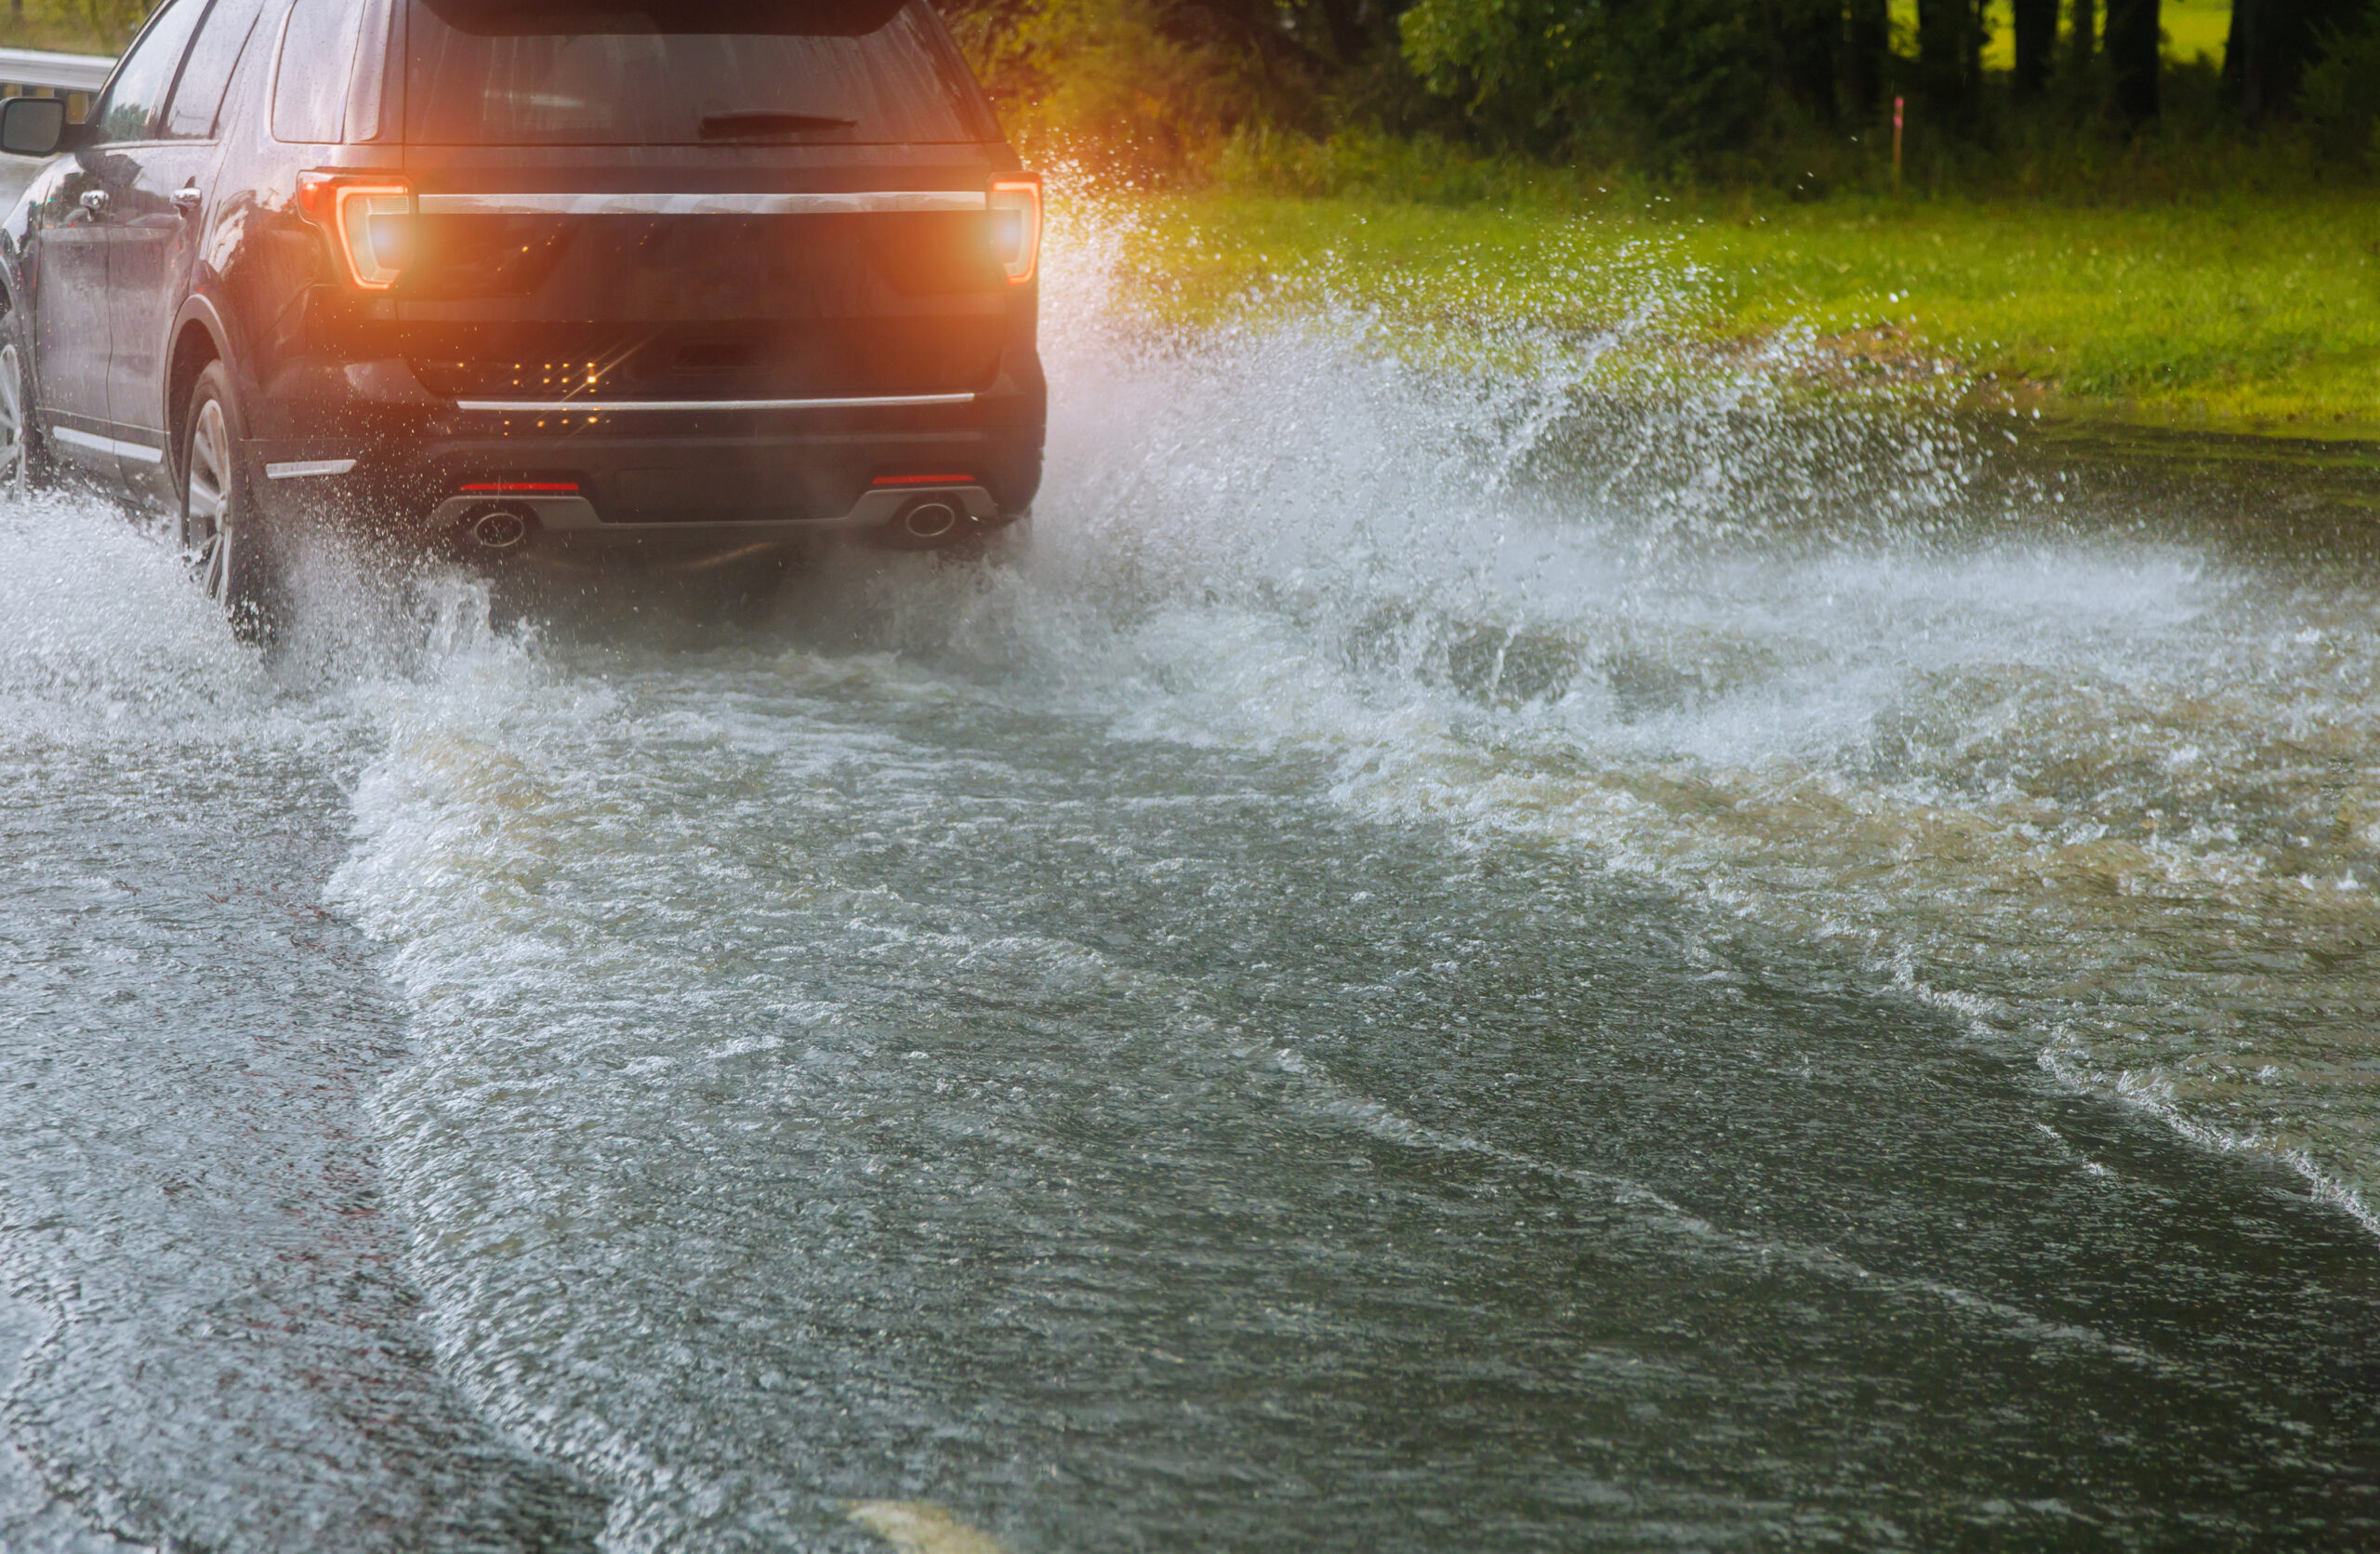 Spraying Water Of A Car Moving Driving Car On Flooded Road During Flood Caused By Torrential Rains Cars Float On Water Flooding Streets